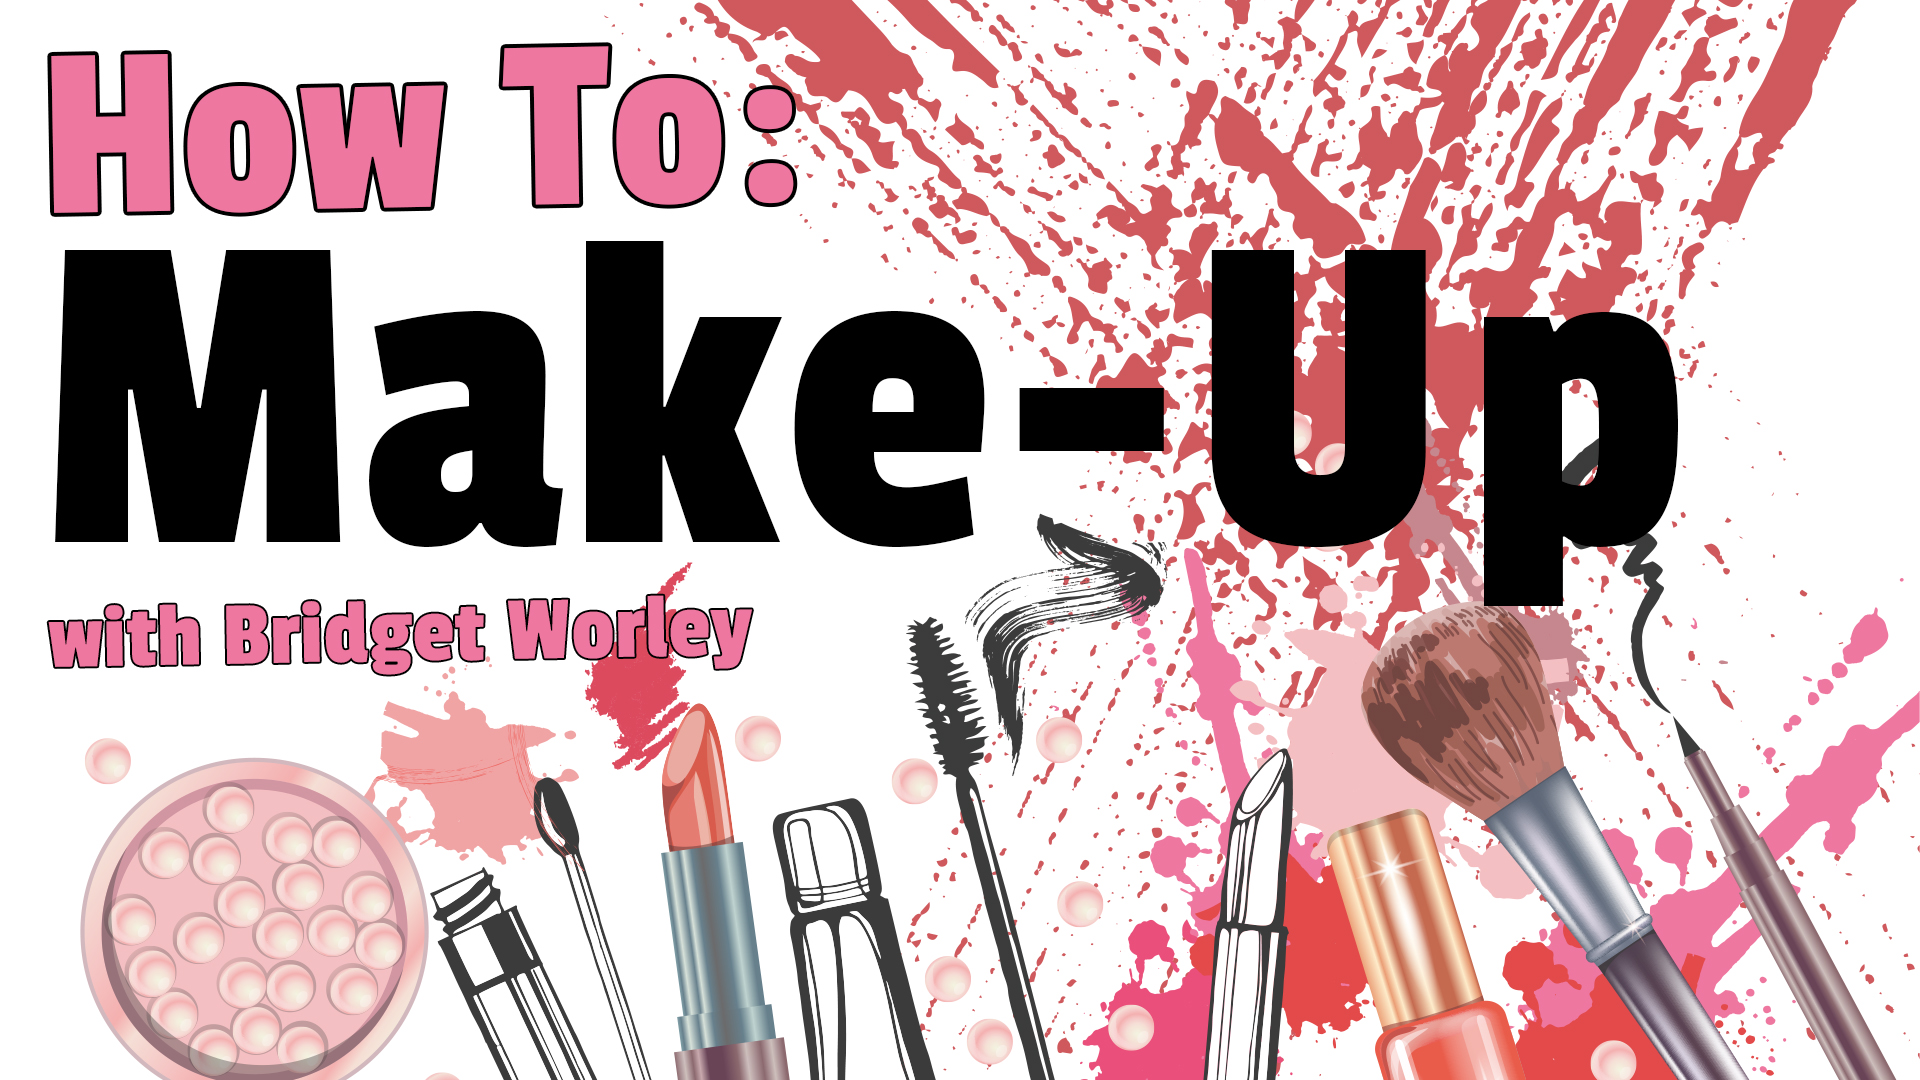 Image reads "How To: Make-Up with Bridget Worley" against a background with make-up brushes and different cosmetic products.